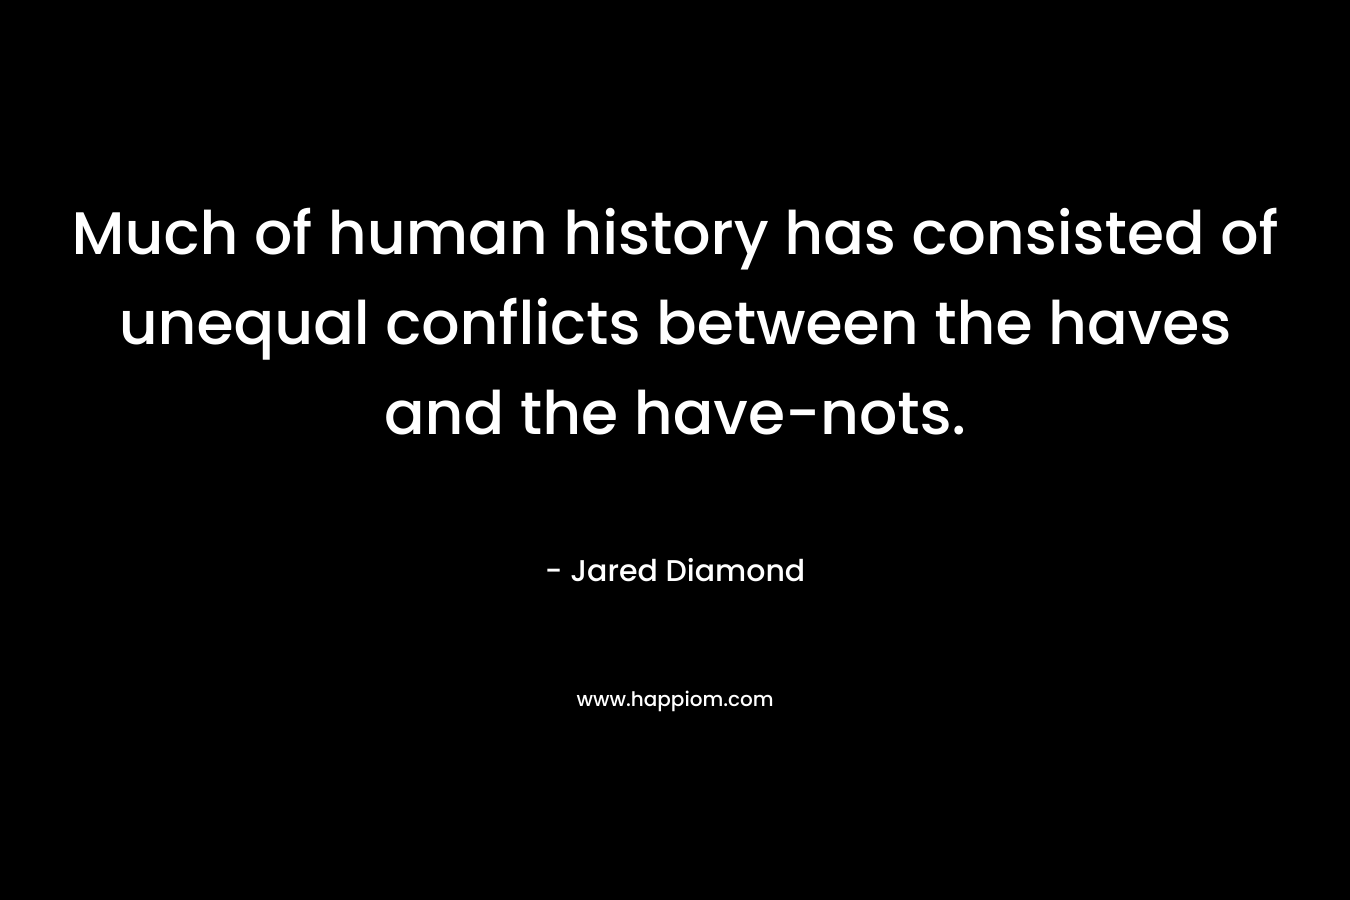 Much of human history has consisted of unequal conflicts between the haves and the have-nots.